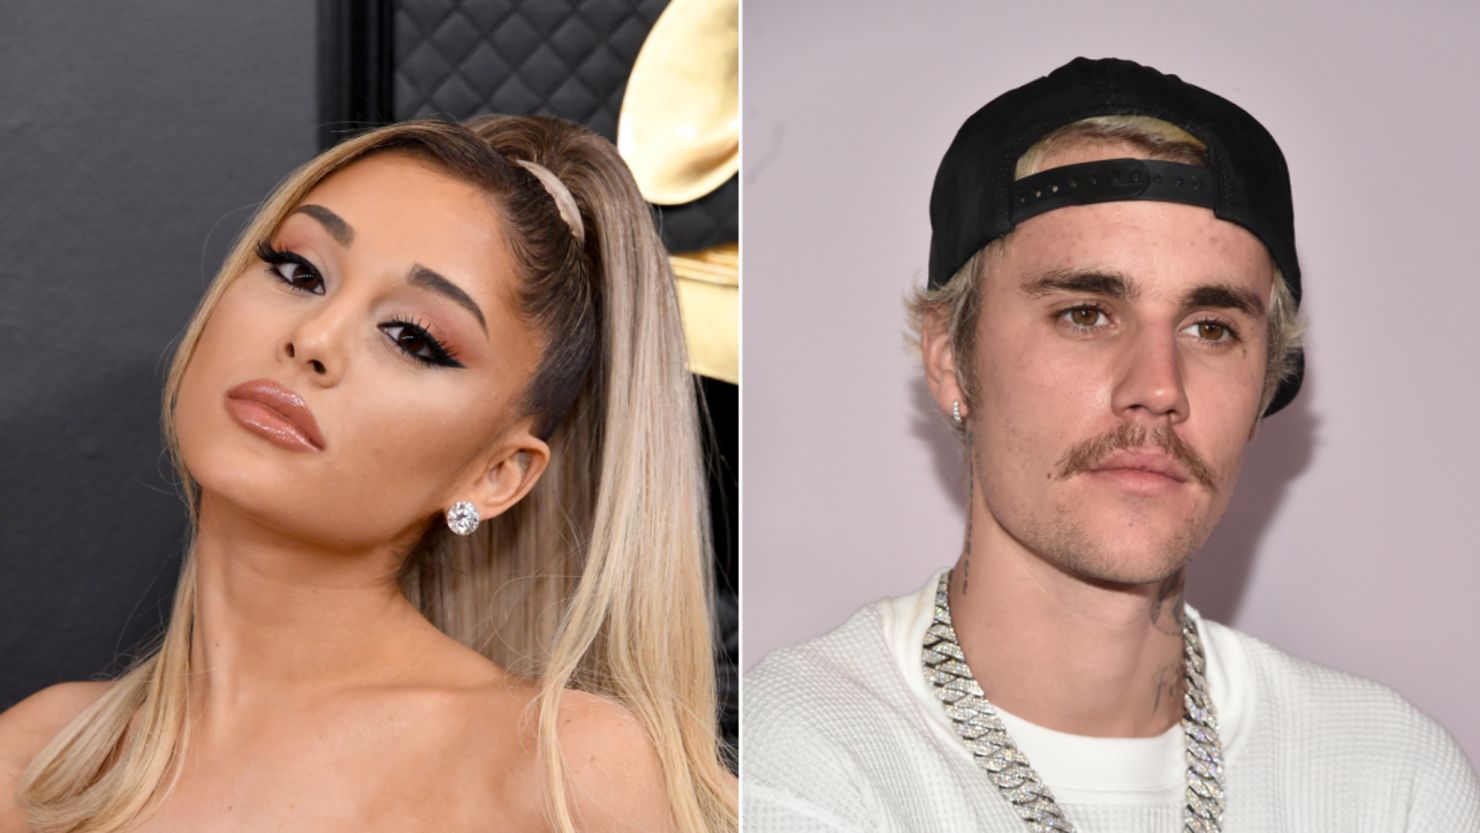 Ariana Grande and Justin Bieber are releasing "Stuck With U" next week.